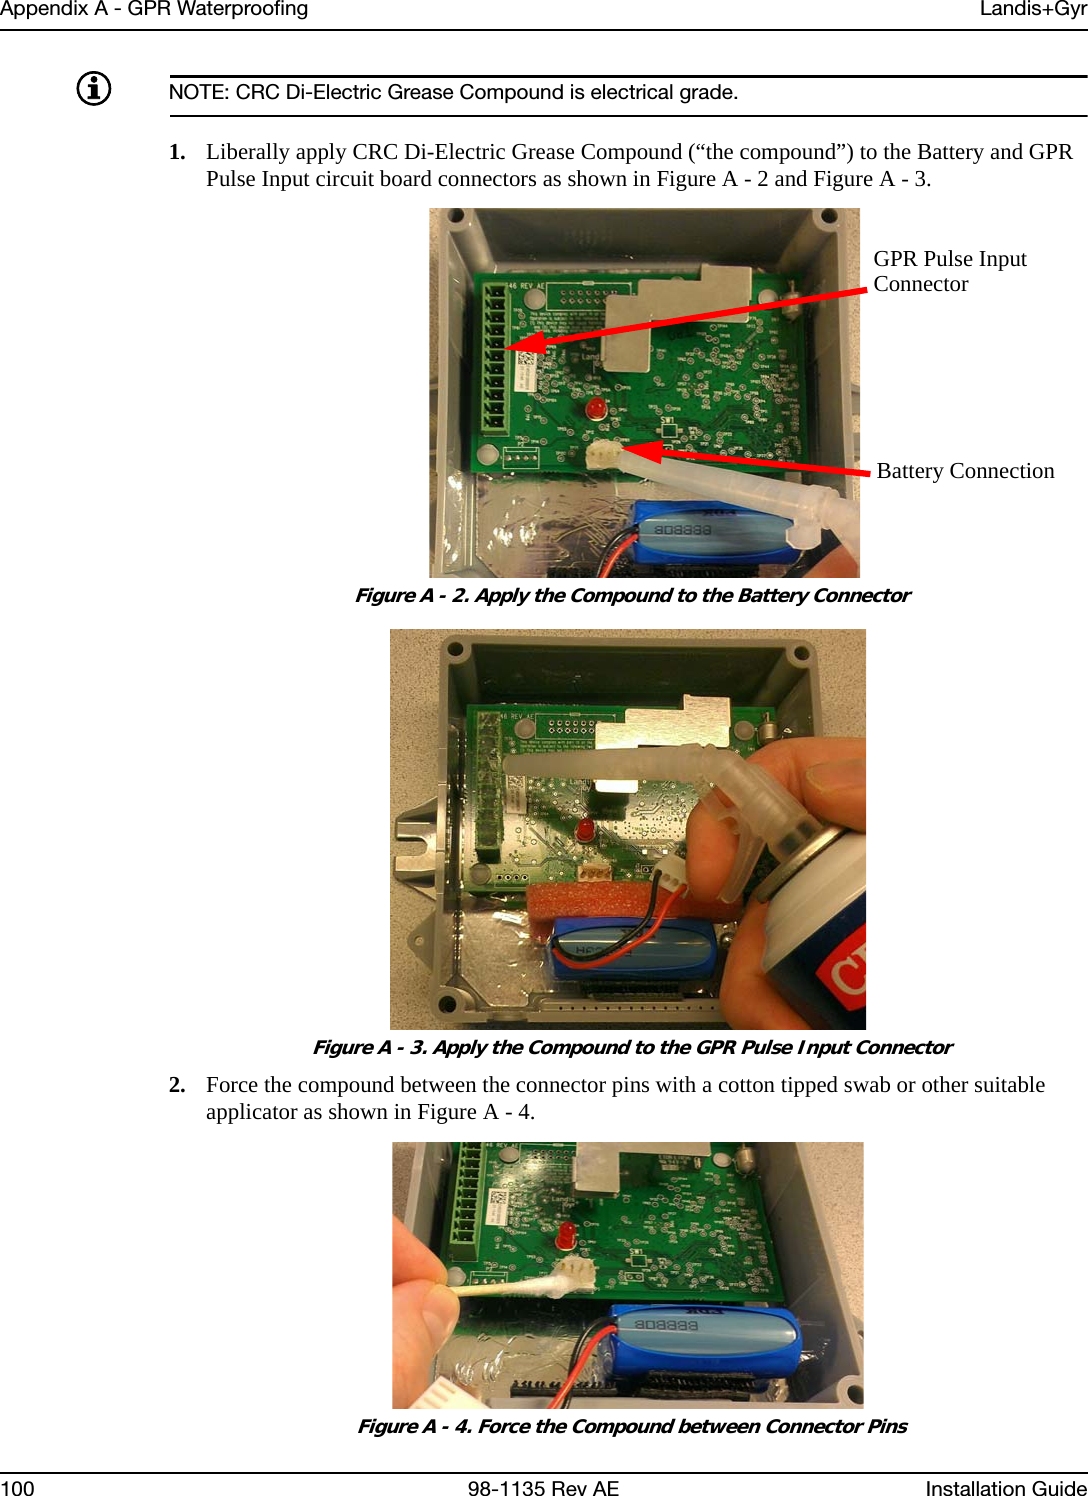 Appendix A - GPR Waterproofing Landis+Gyr100 98-1135 Rev AE Installation GuideNOTE: CRC Di-Electric Grease Compound is electrical grade.1. Liberally apply CRC Di-Electric Grease Compound (“the compound”) to the Battery and GPR Pulse Input circuit board connectors as shown in Figure A - 2 and Figure A - 3. Figure A - 2. Apply the Compound to the Battery Connector Figure A - 3. Apply the Compound to the GPR Pulse Input Connector2. Force the compound between the connector pins with a cotton tipped swab or other suitable applicator as shown in Figure A - 4. Figure A - 4. Force the Compound between Connector PinsGPR Pulse InputConnectorBattery Connection